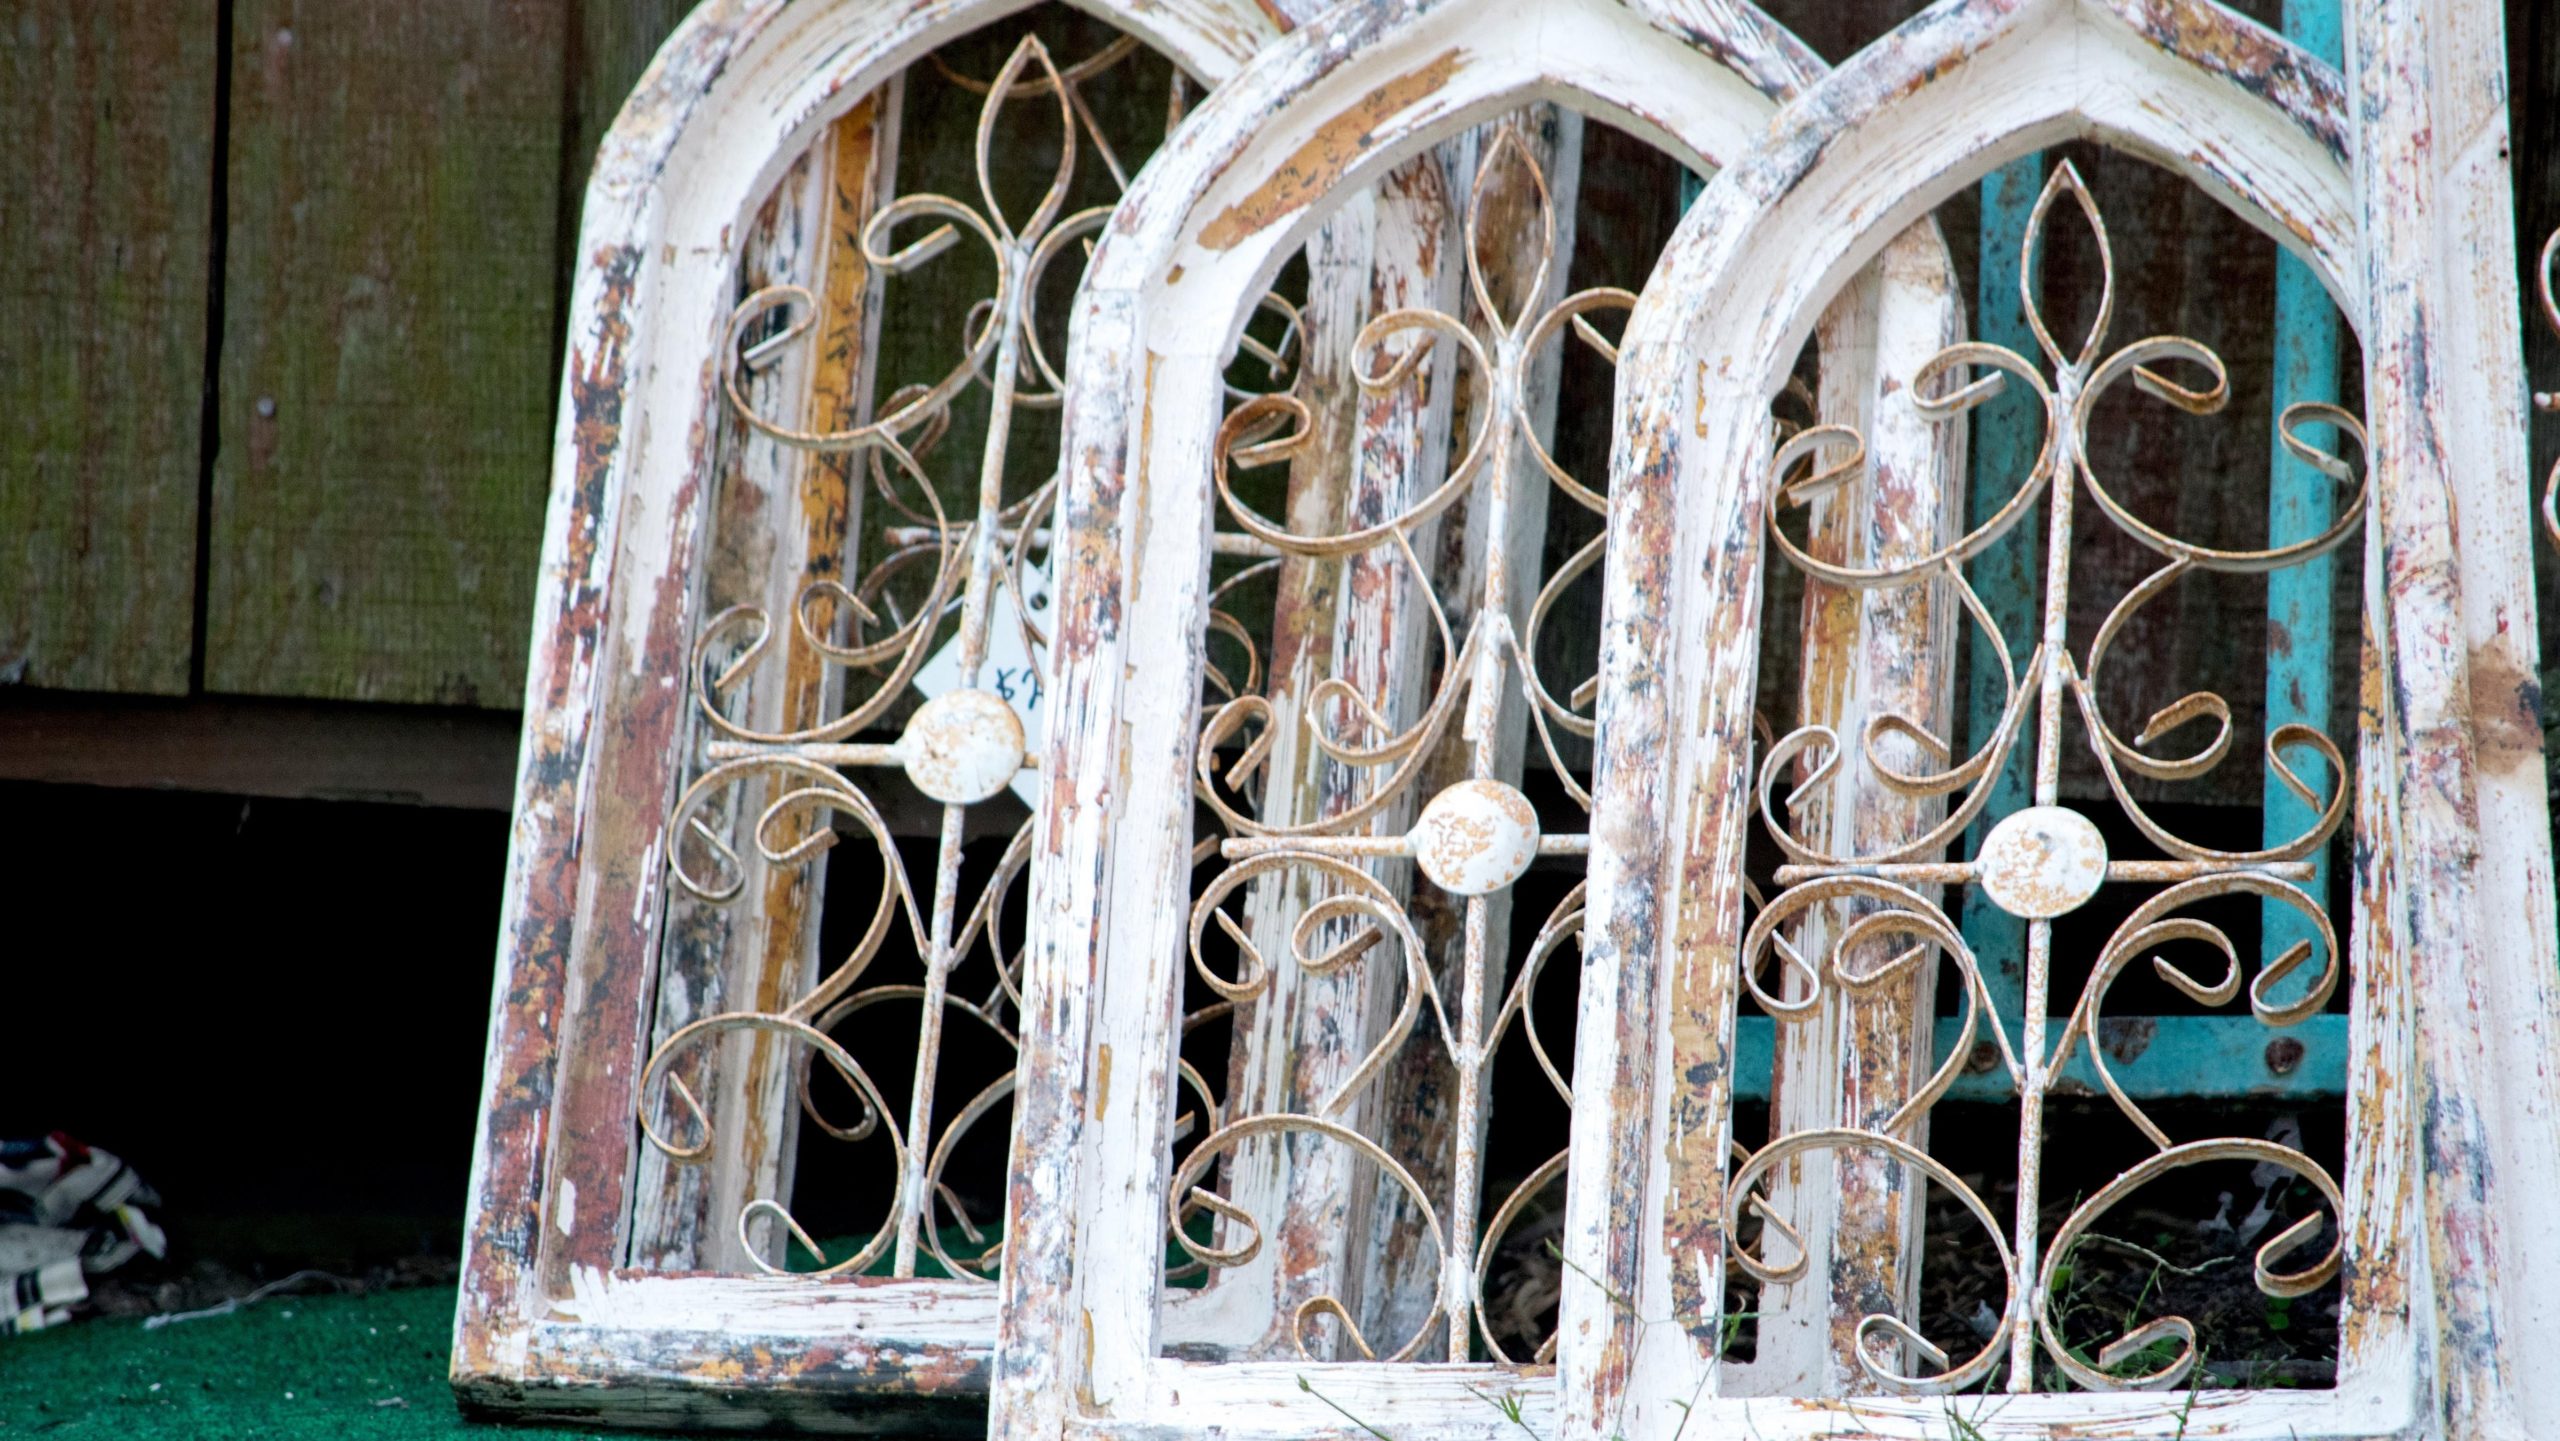 How to Go Shopping for Architectural Salvage